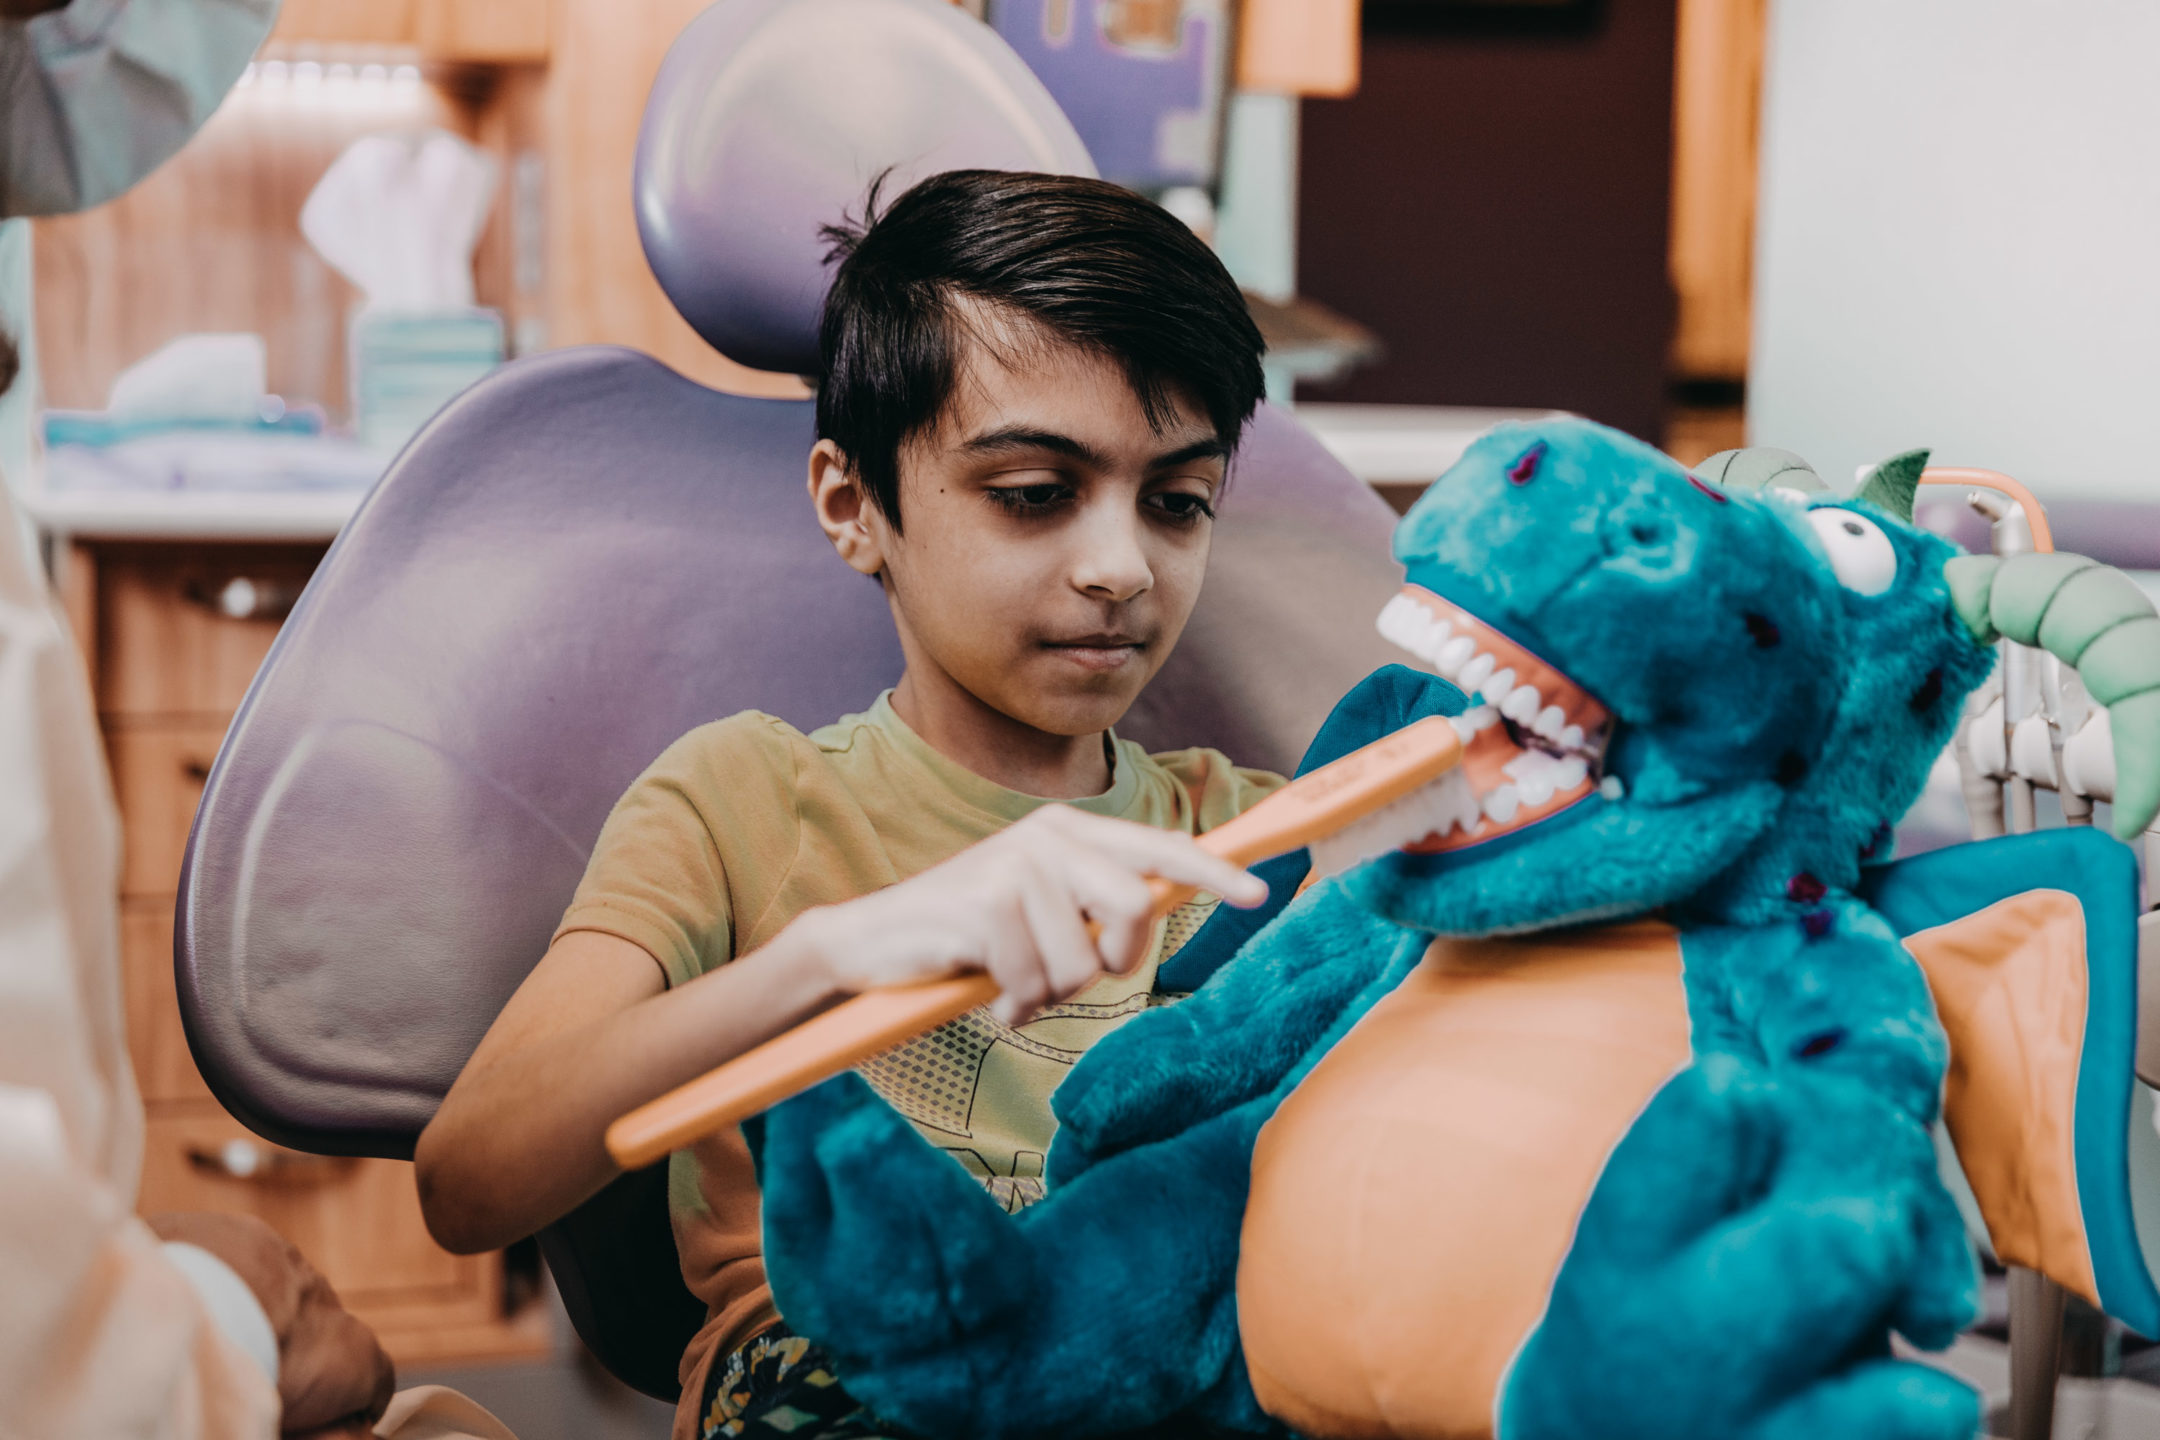 A young boy practices toothbrushing on a blue puppet.